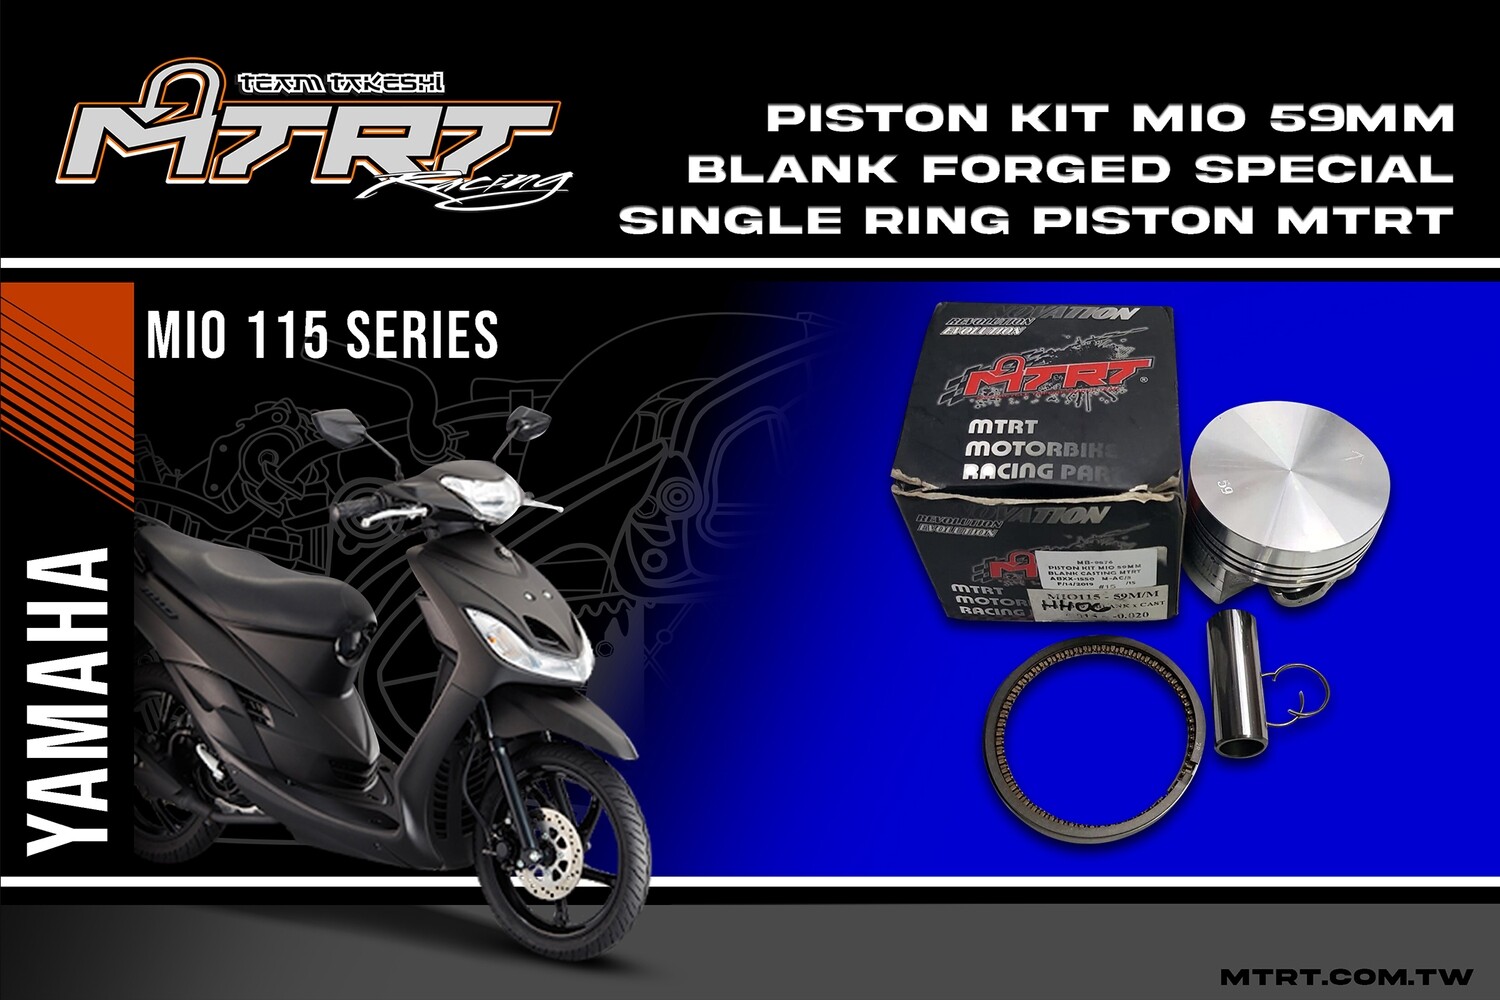 PISTON KIT MIO 59MM BLANK Forged Special SINGLE RING piston MTRT